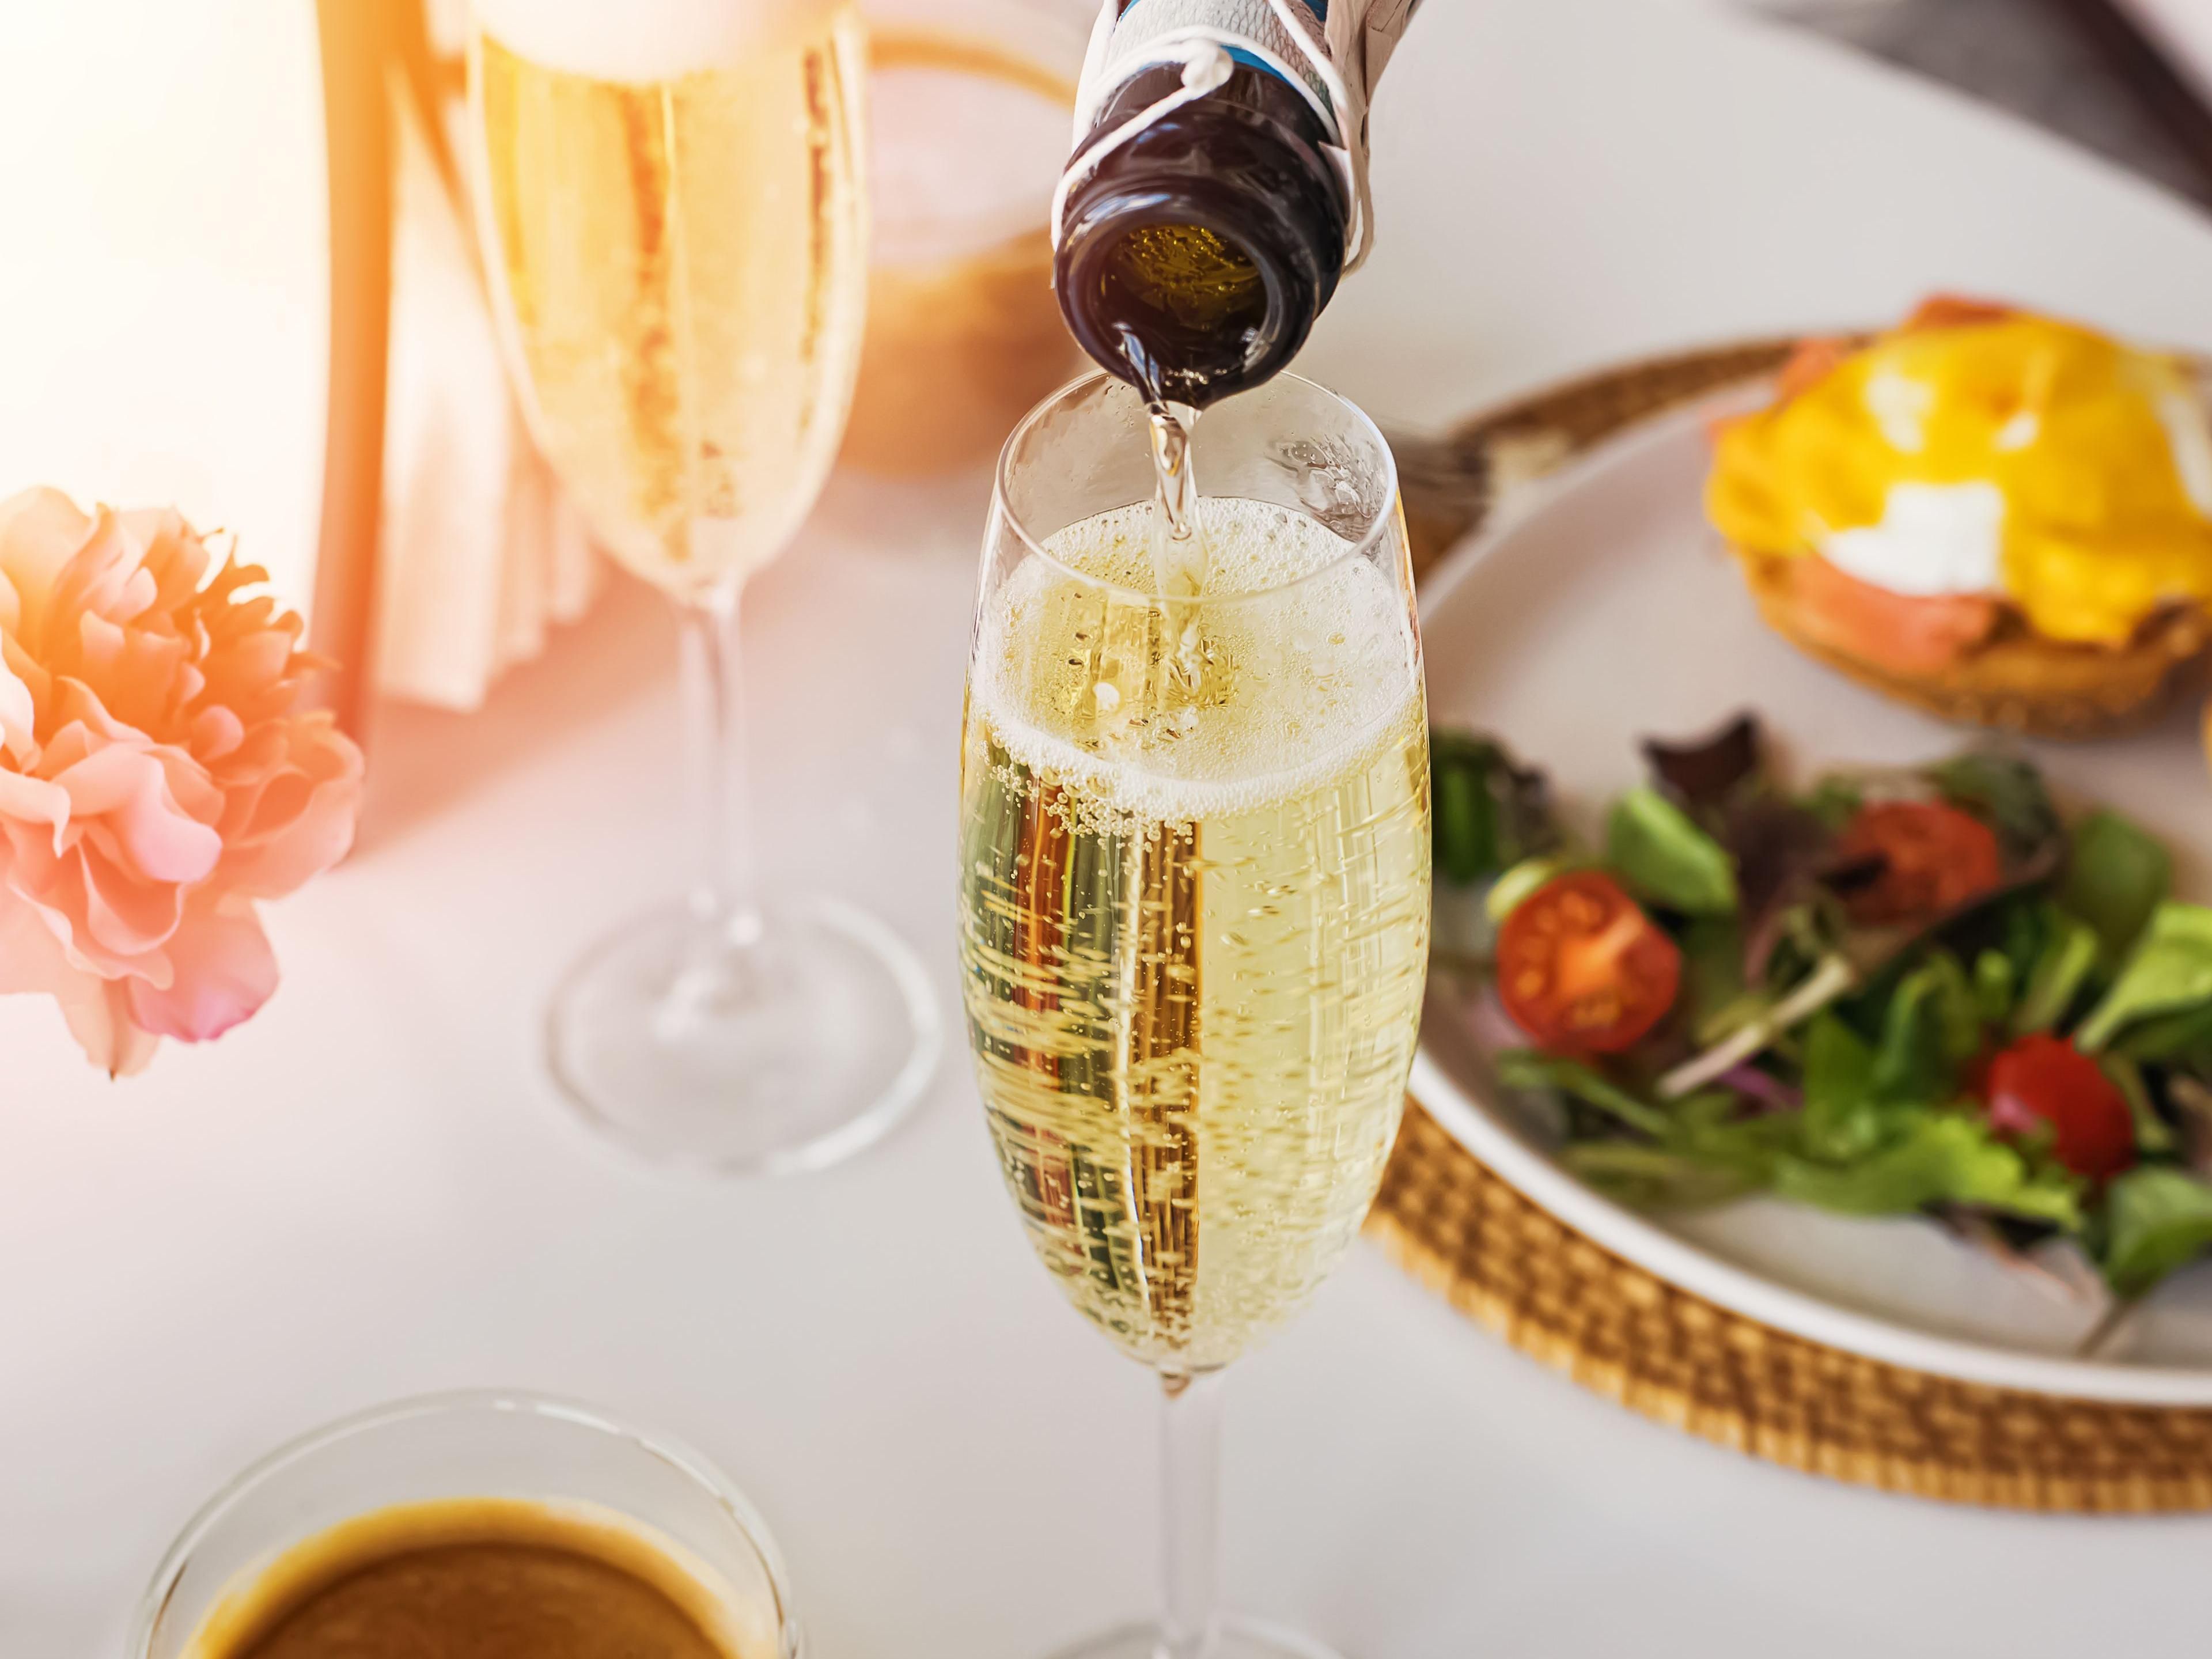 Join us Saturday June 8th for our Belmont Champagne Brunch from 9am until 1pm. Enjoy all your brunch favorites including both a carving and eggs Benedict station, bottomless champagne and mimosas as well as live entertainment! 